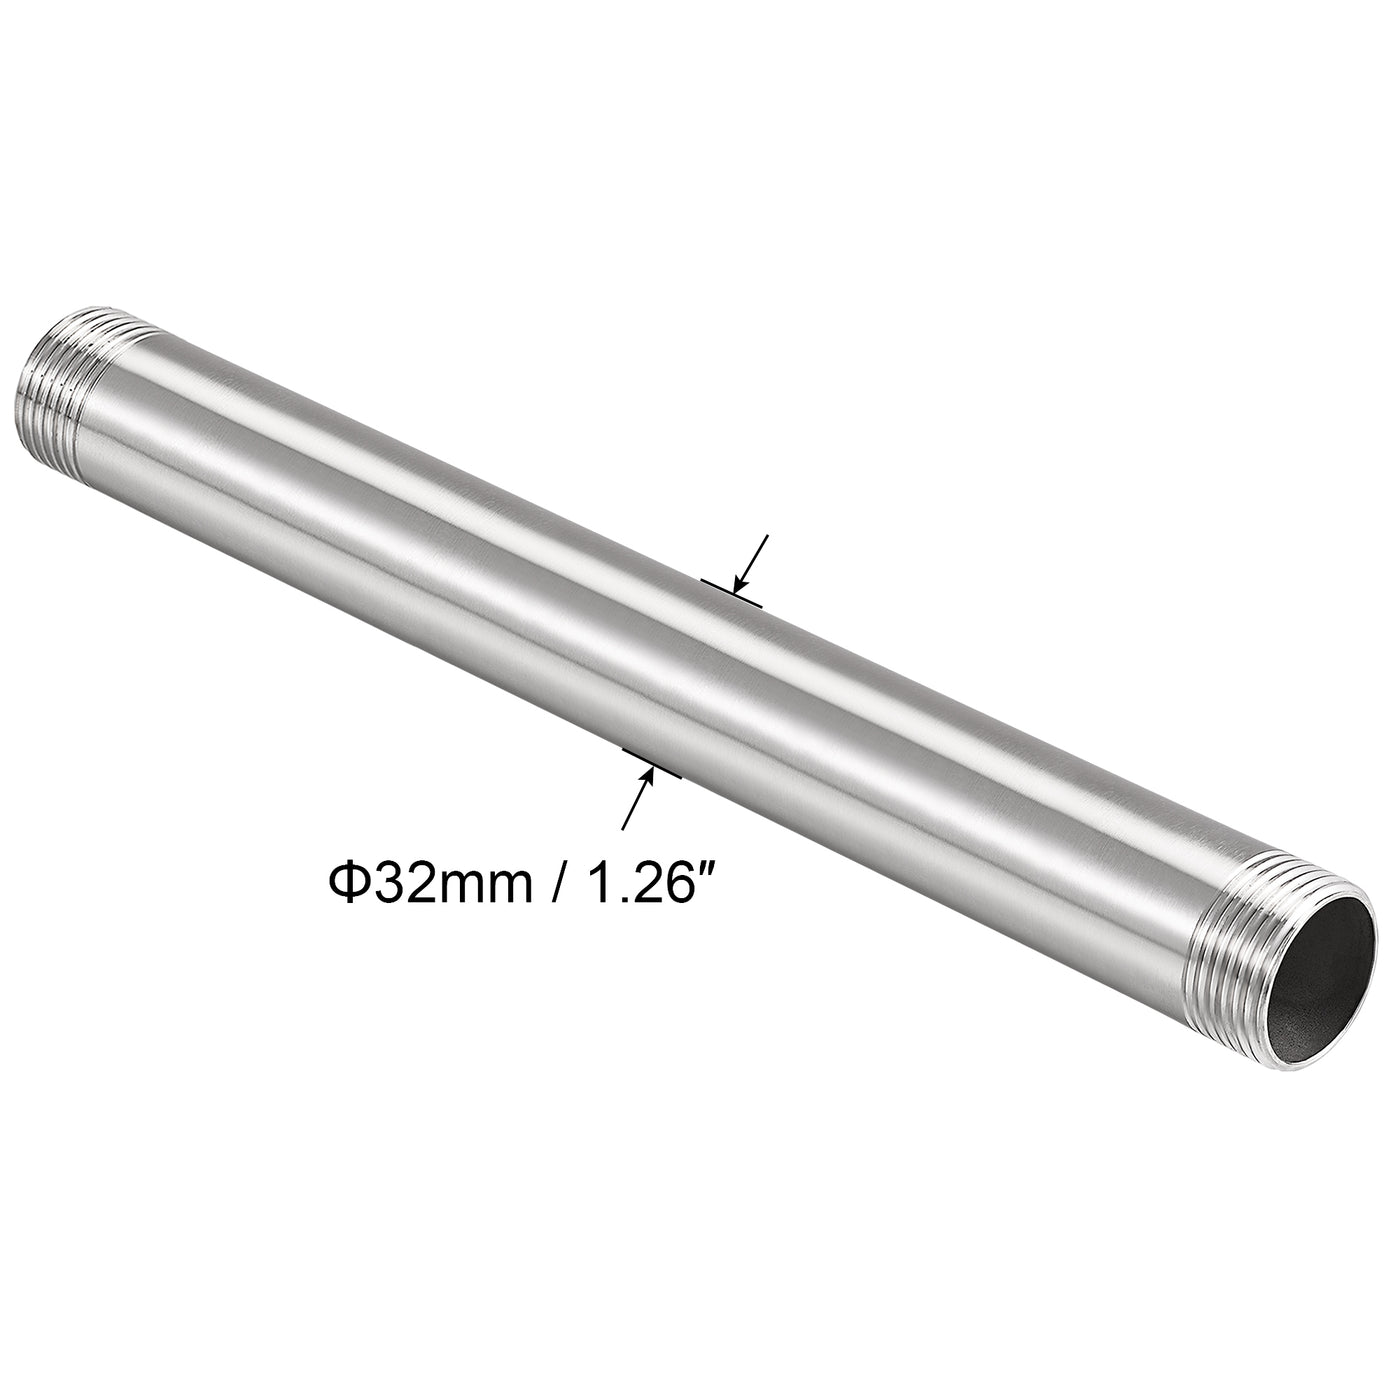 Uxcell Uxcell 304 Stainless Steel Pipe Fitting G1 Male Thread 50mm Length Coupler for Extending Pipes